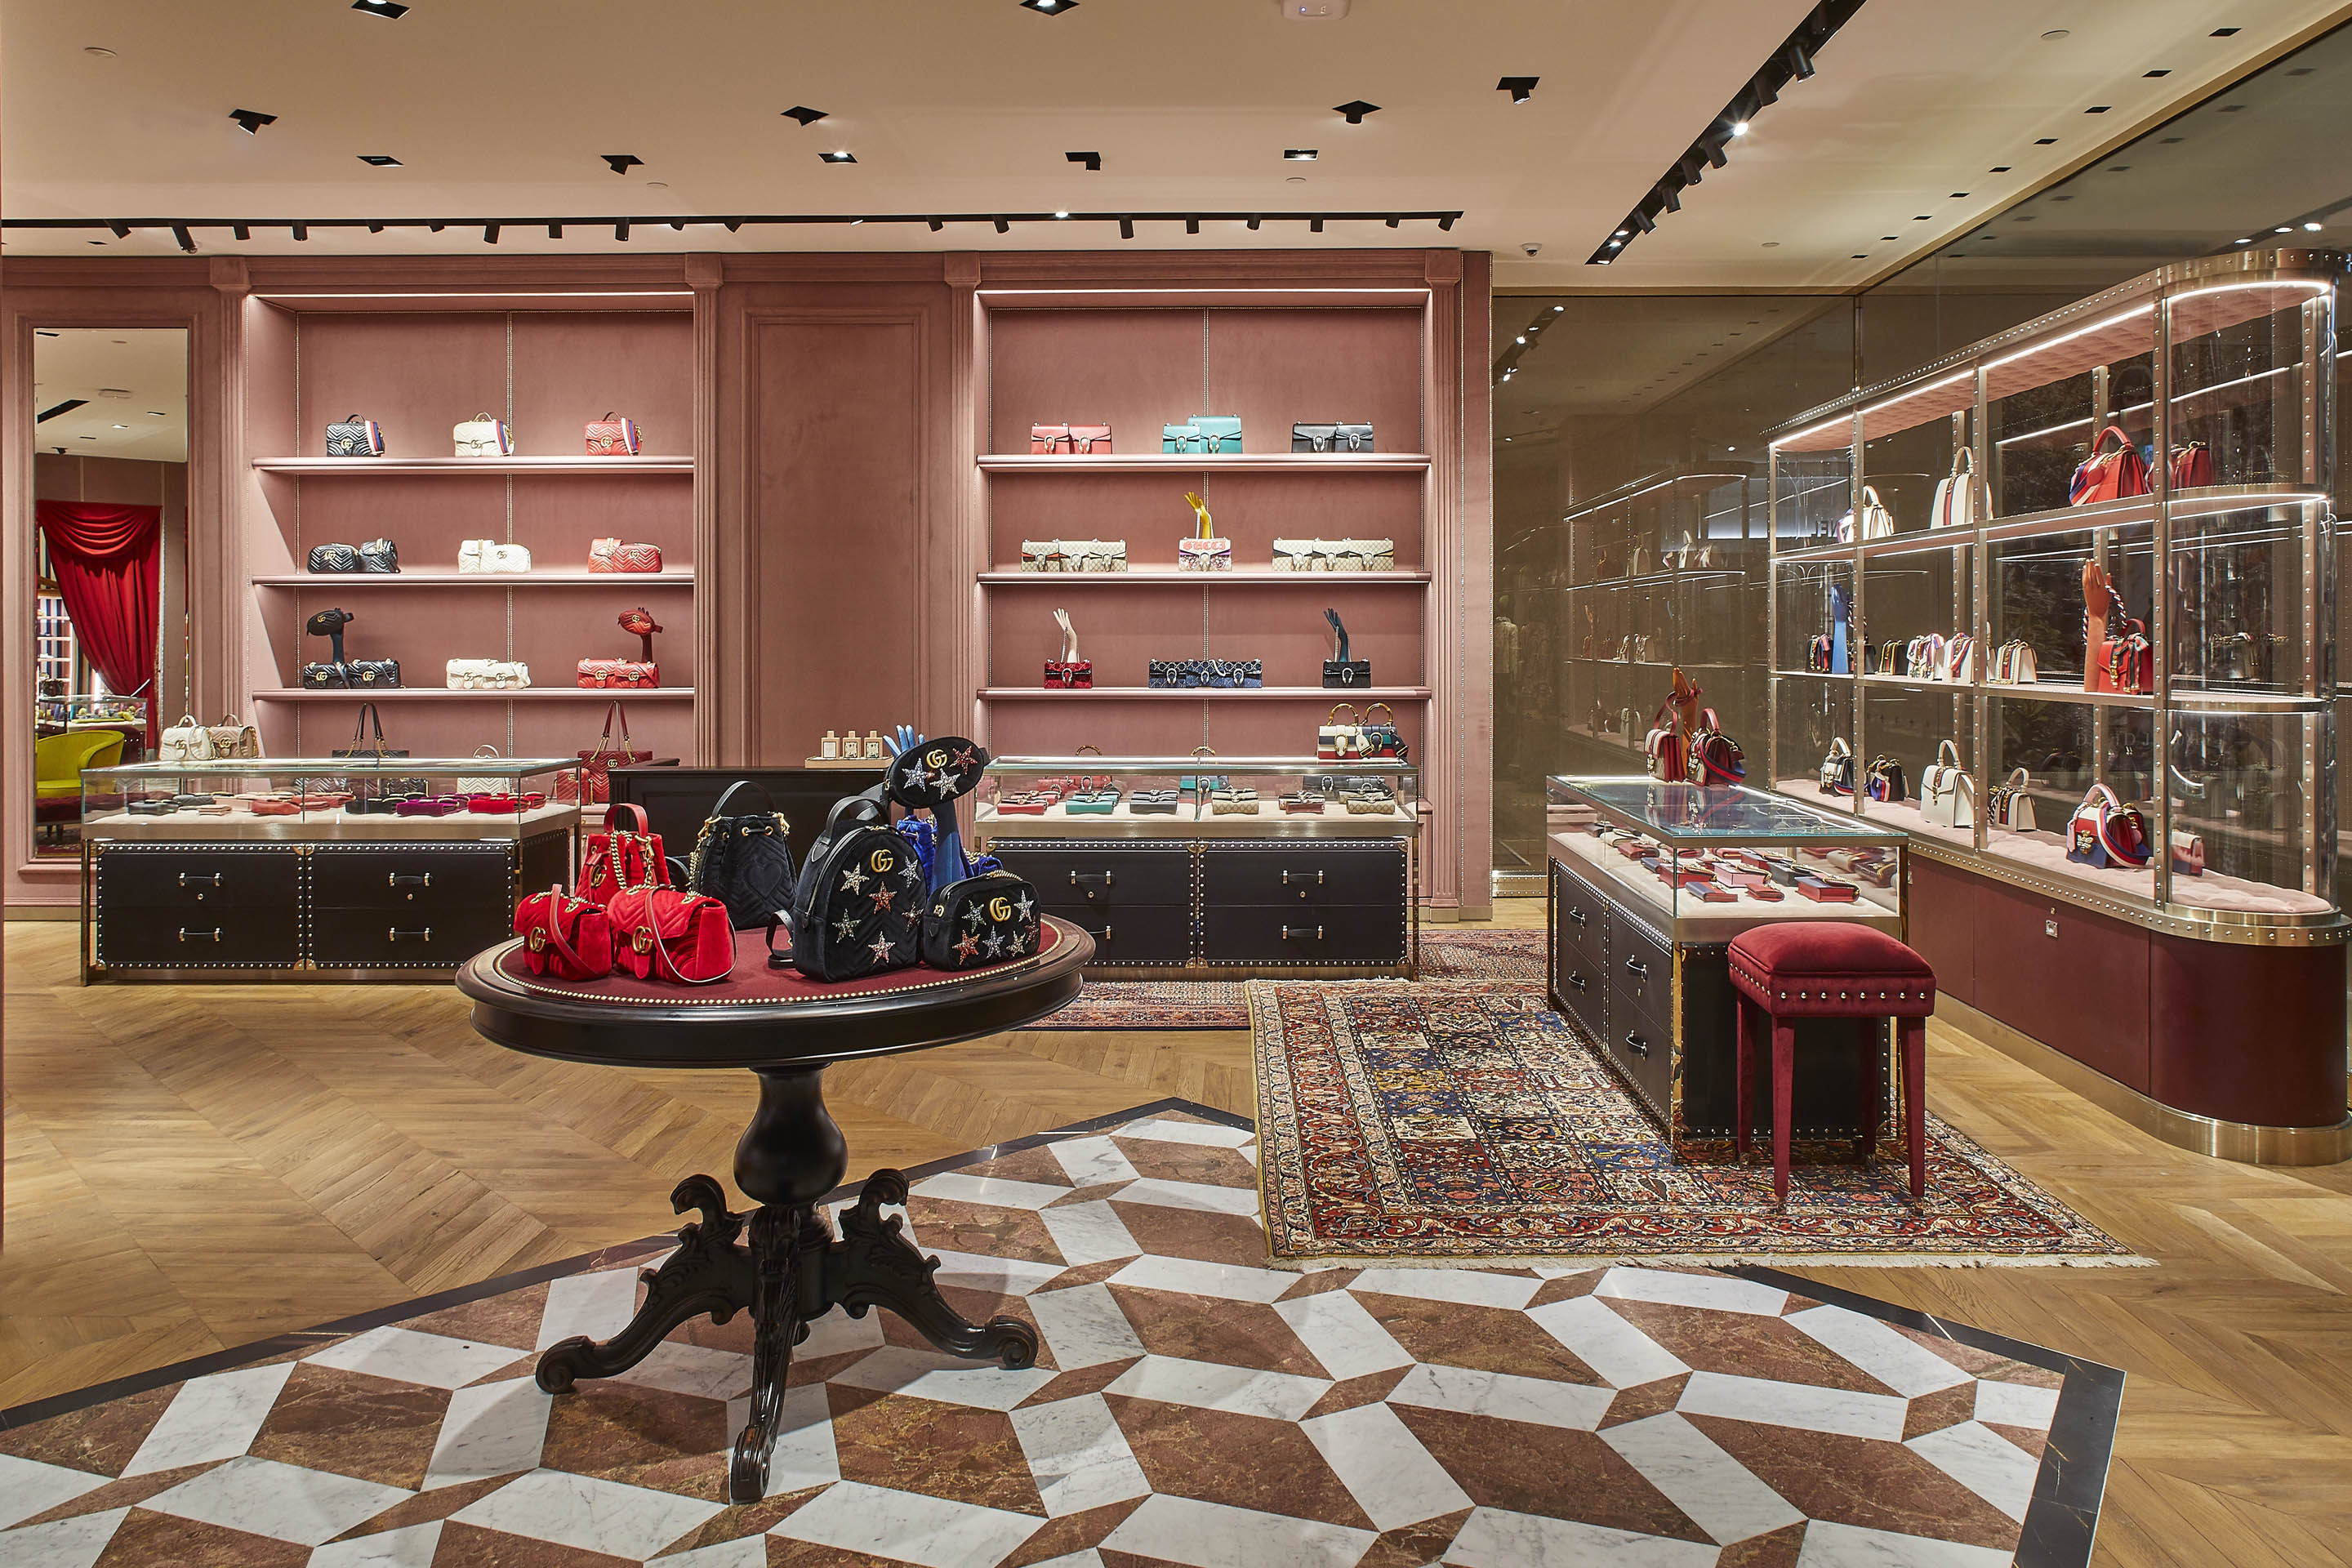 gucci chadstone opening hours